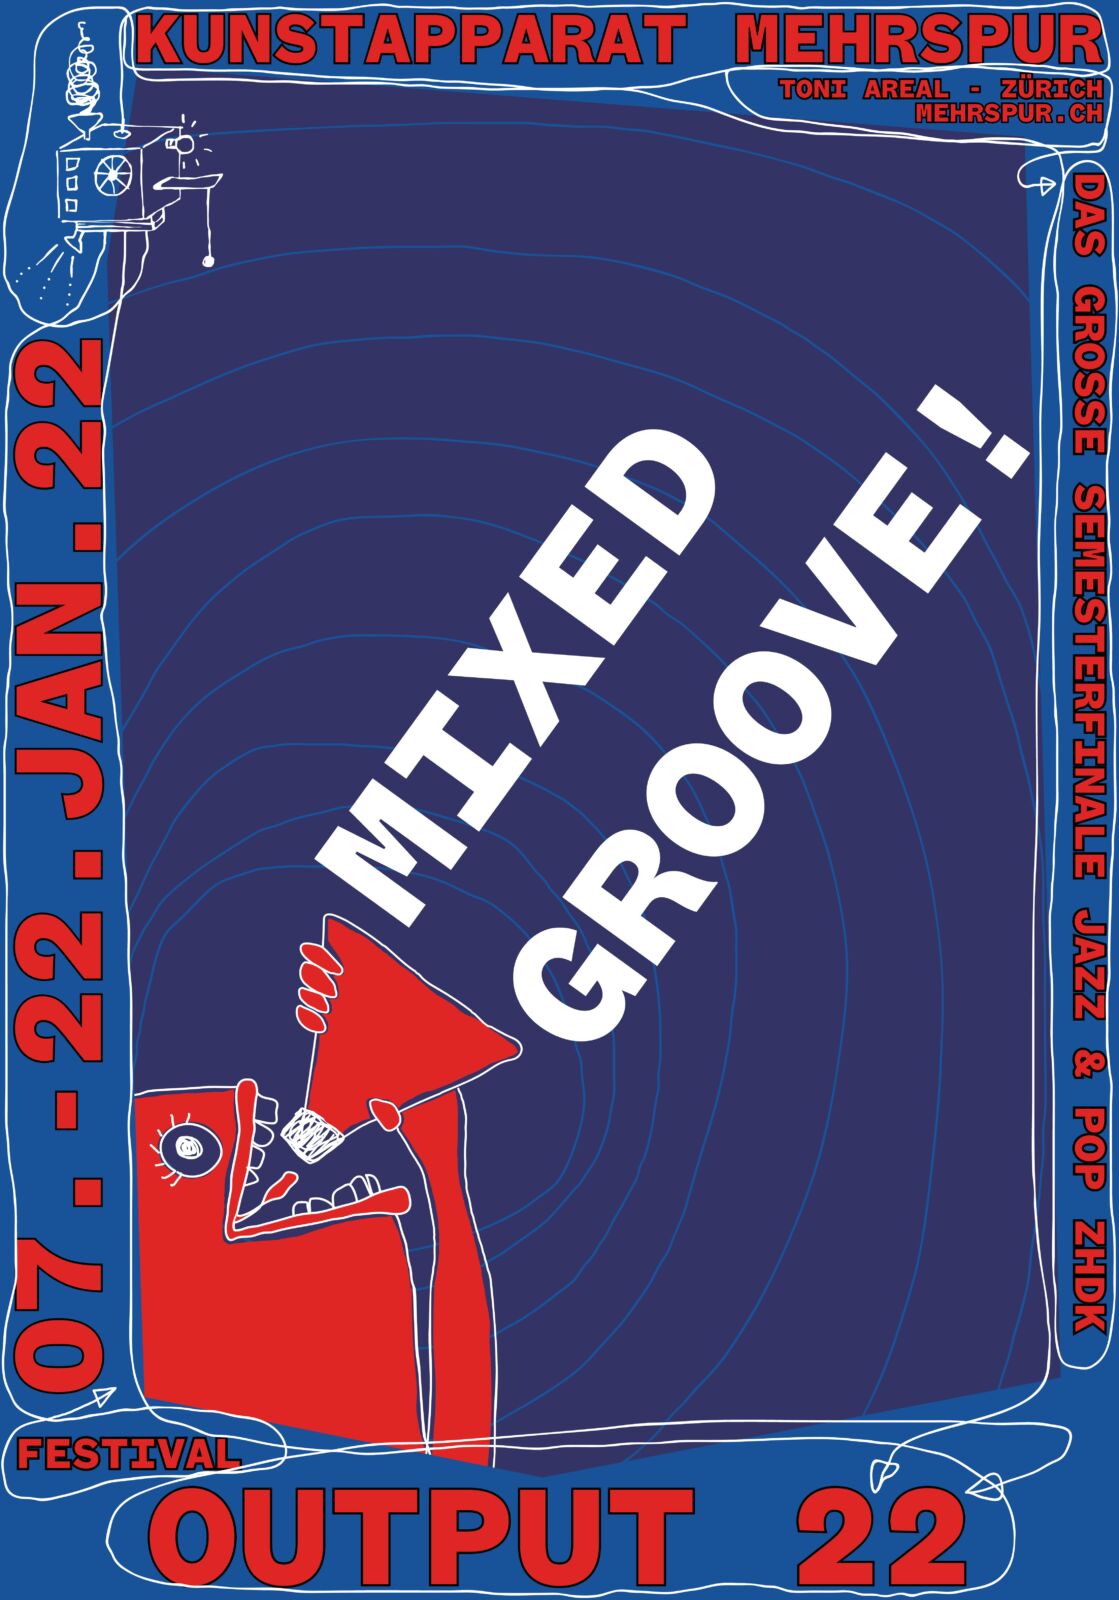 MIXED GROOVE!